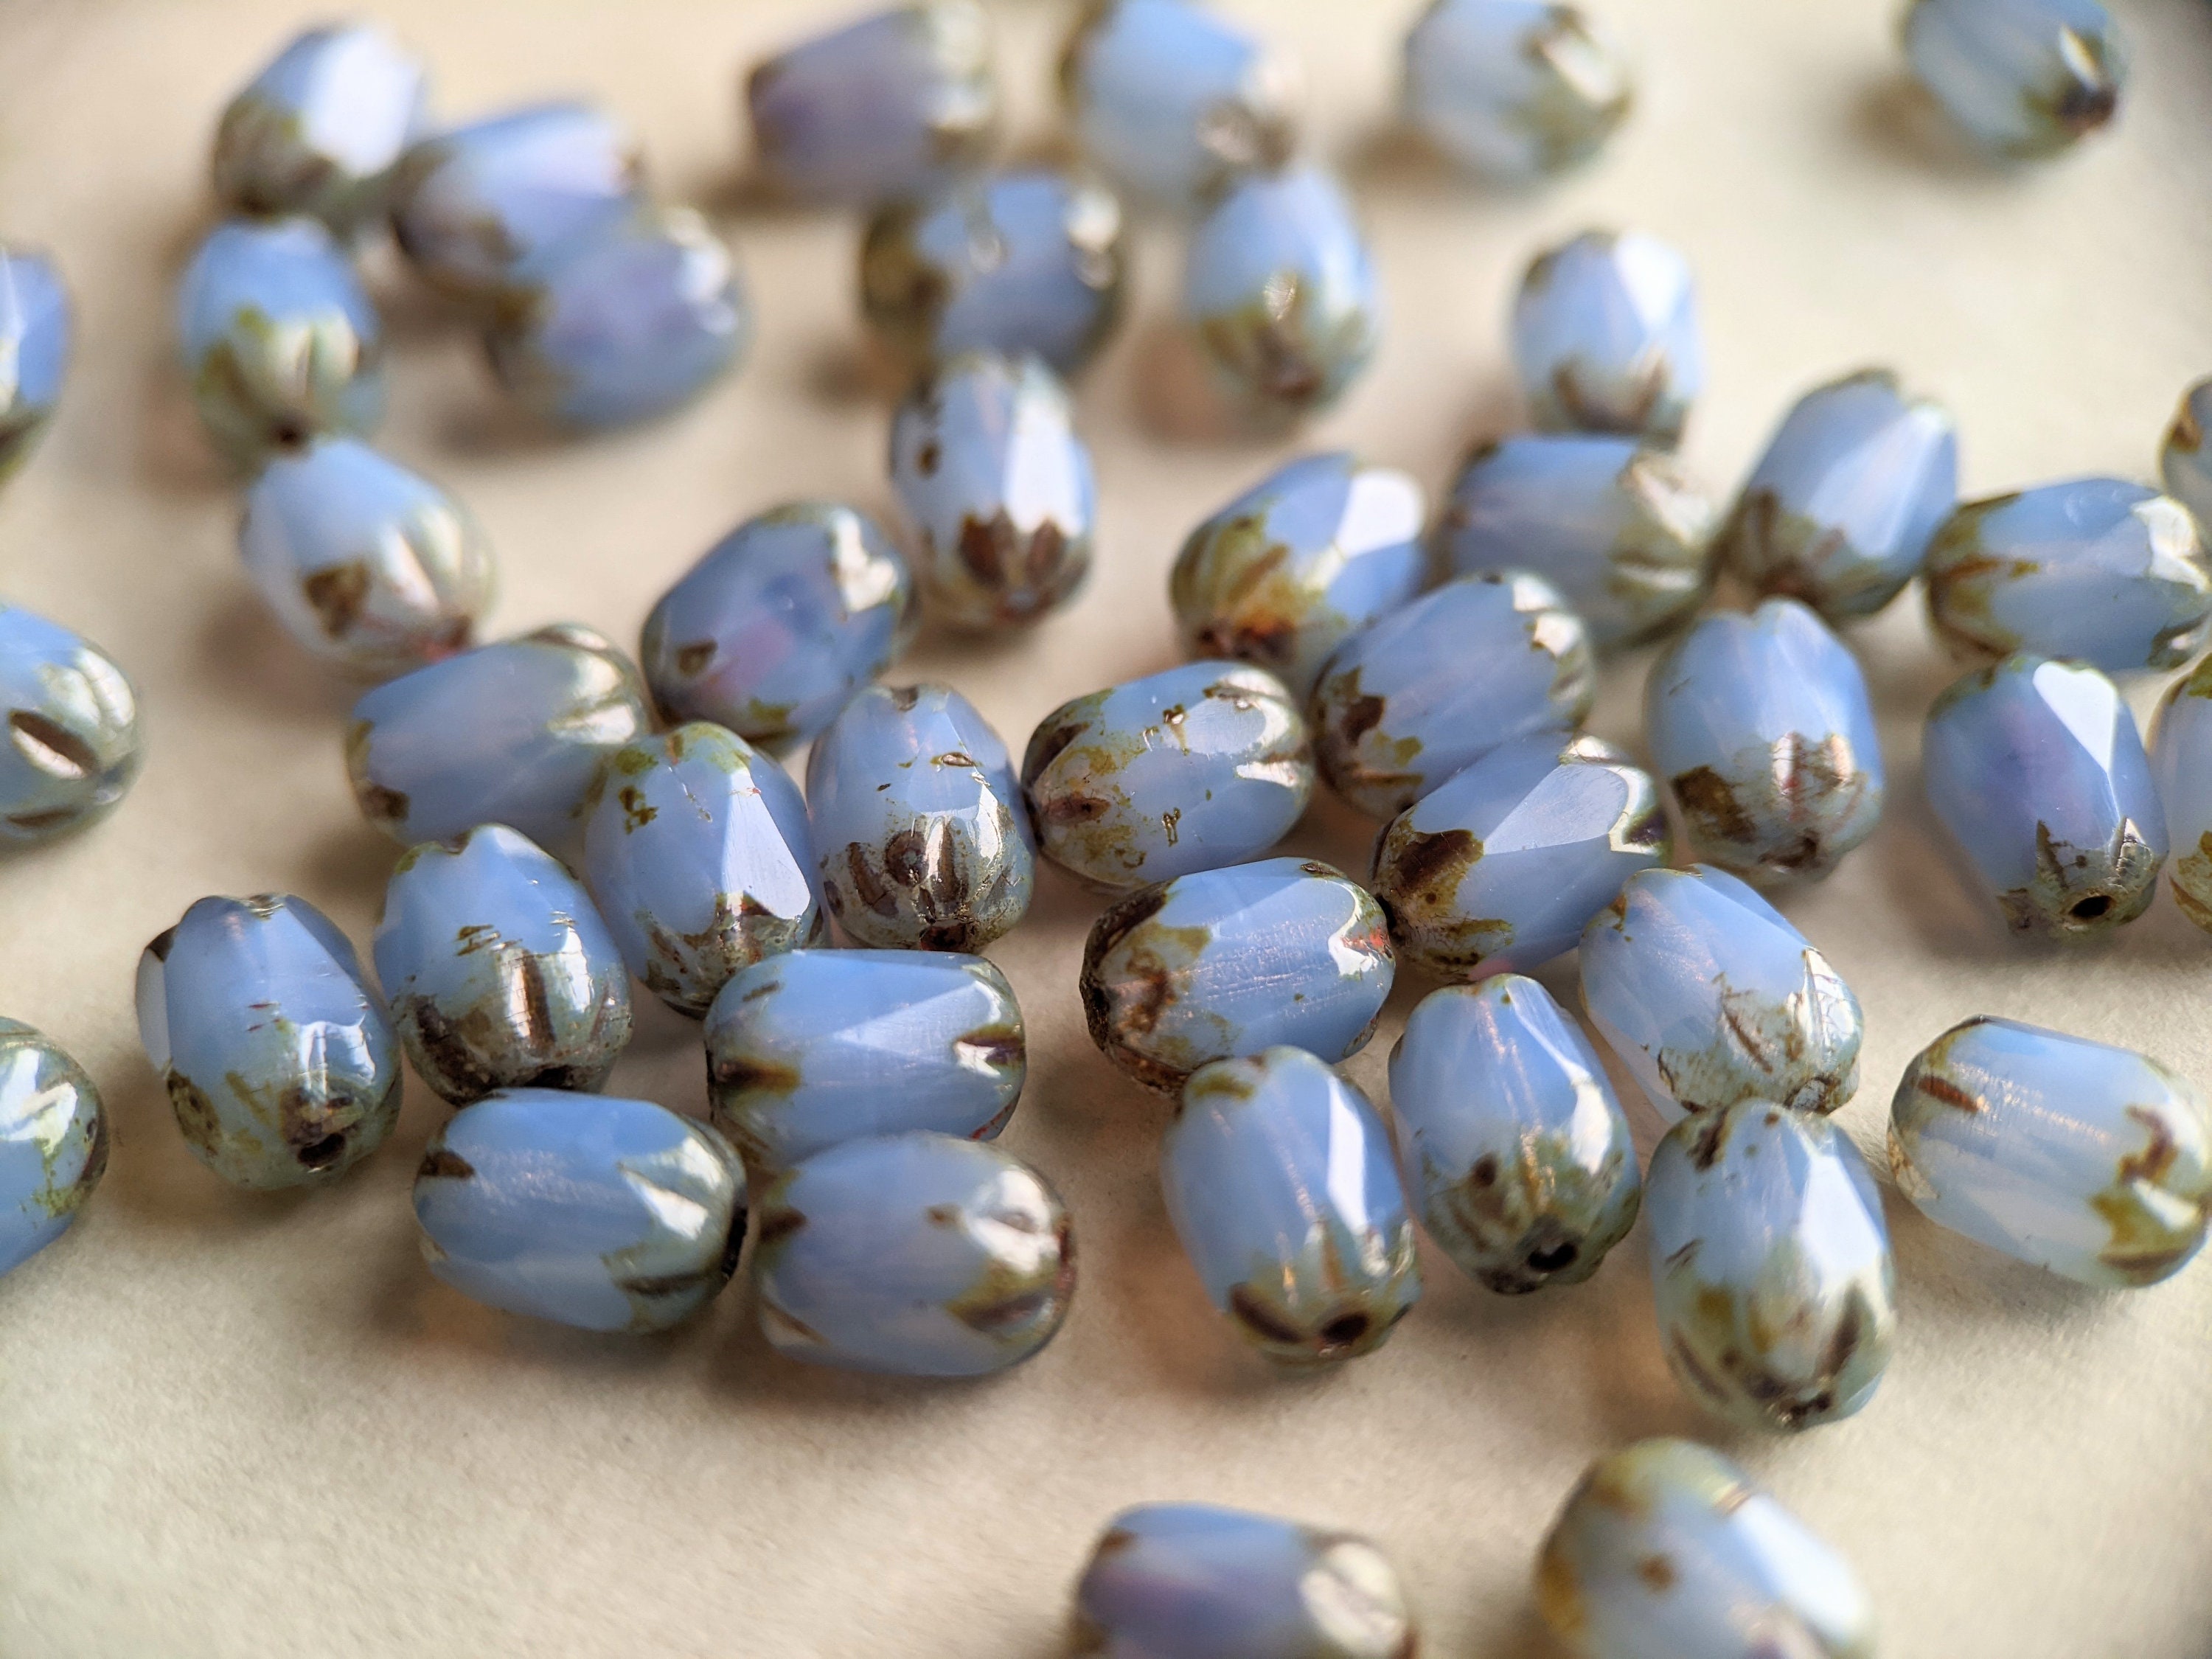 Buy 9.66 Ctw Natural 25 Drilled Neon Blue Fire Opal Beads